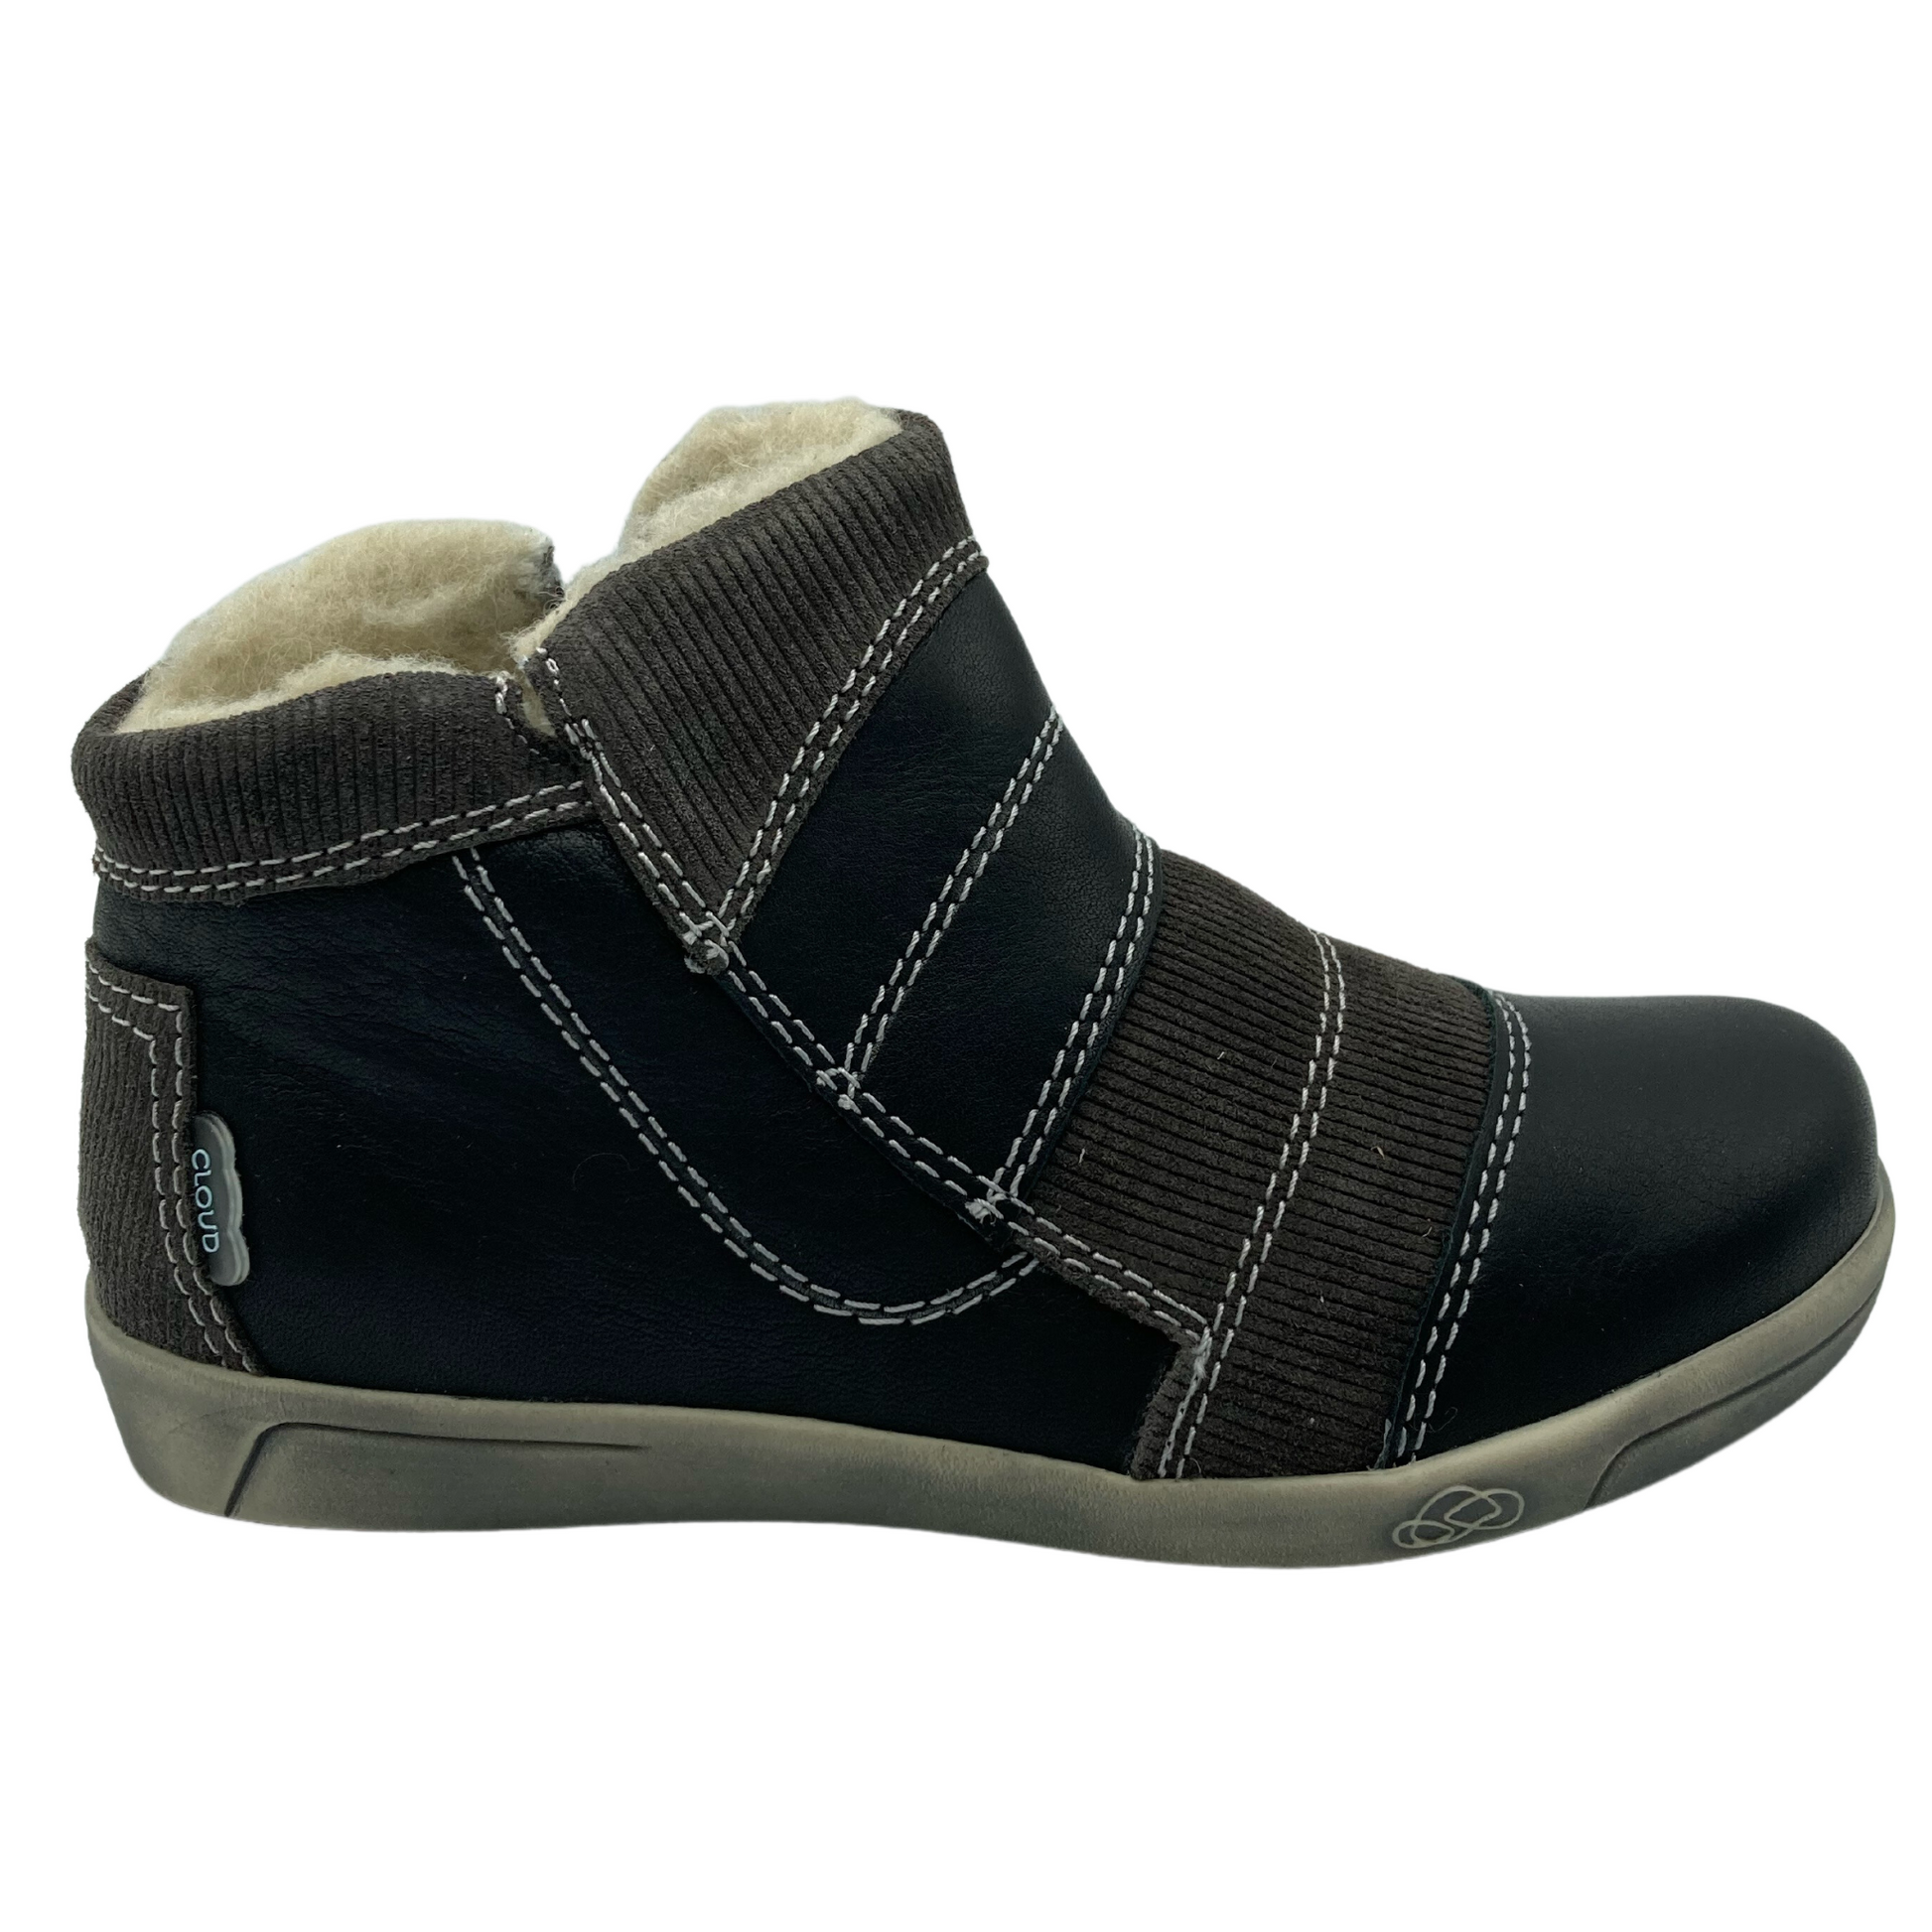 Right facing view of leather patchwork ankle boot with wool lining and rubber outsole